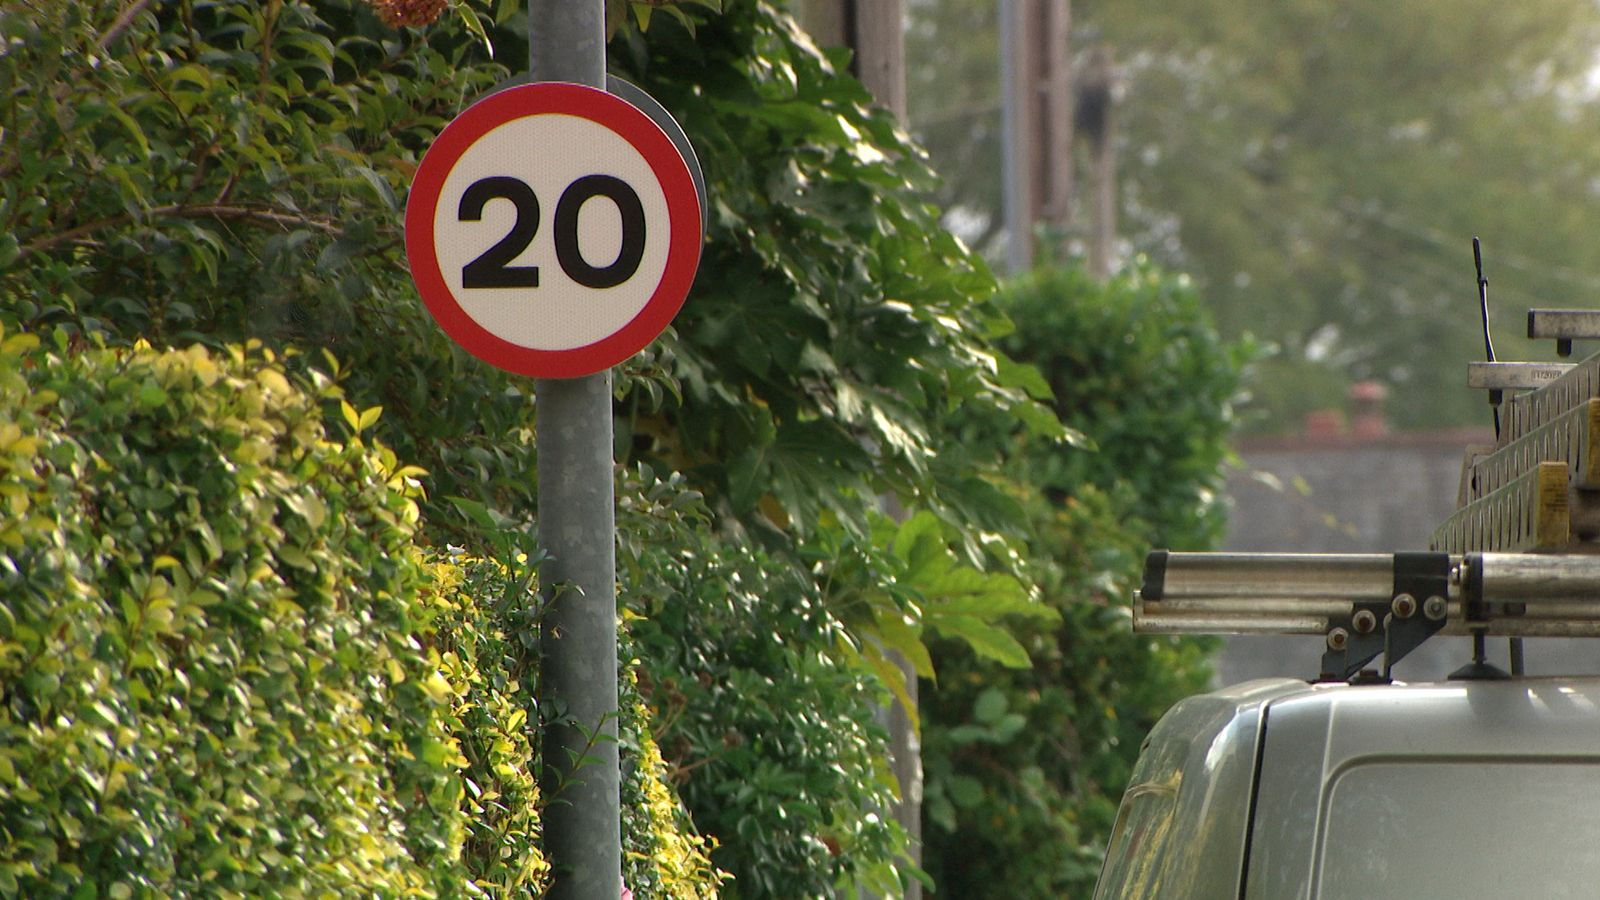 Nearly all residential roads in Wales become 20mph